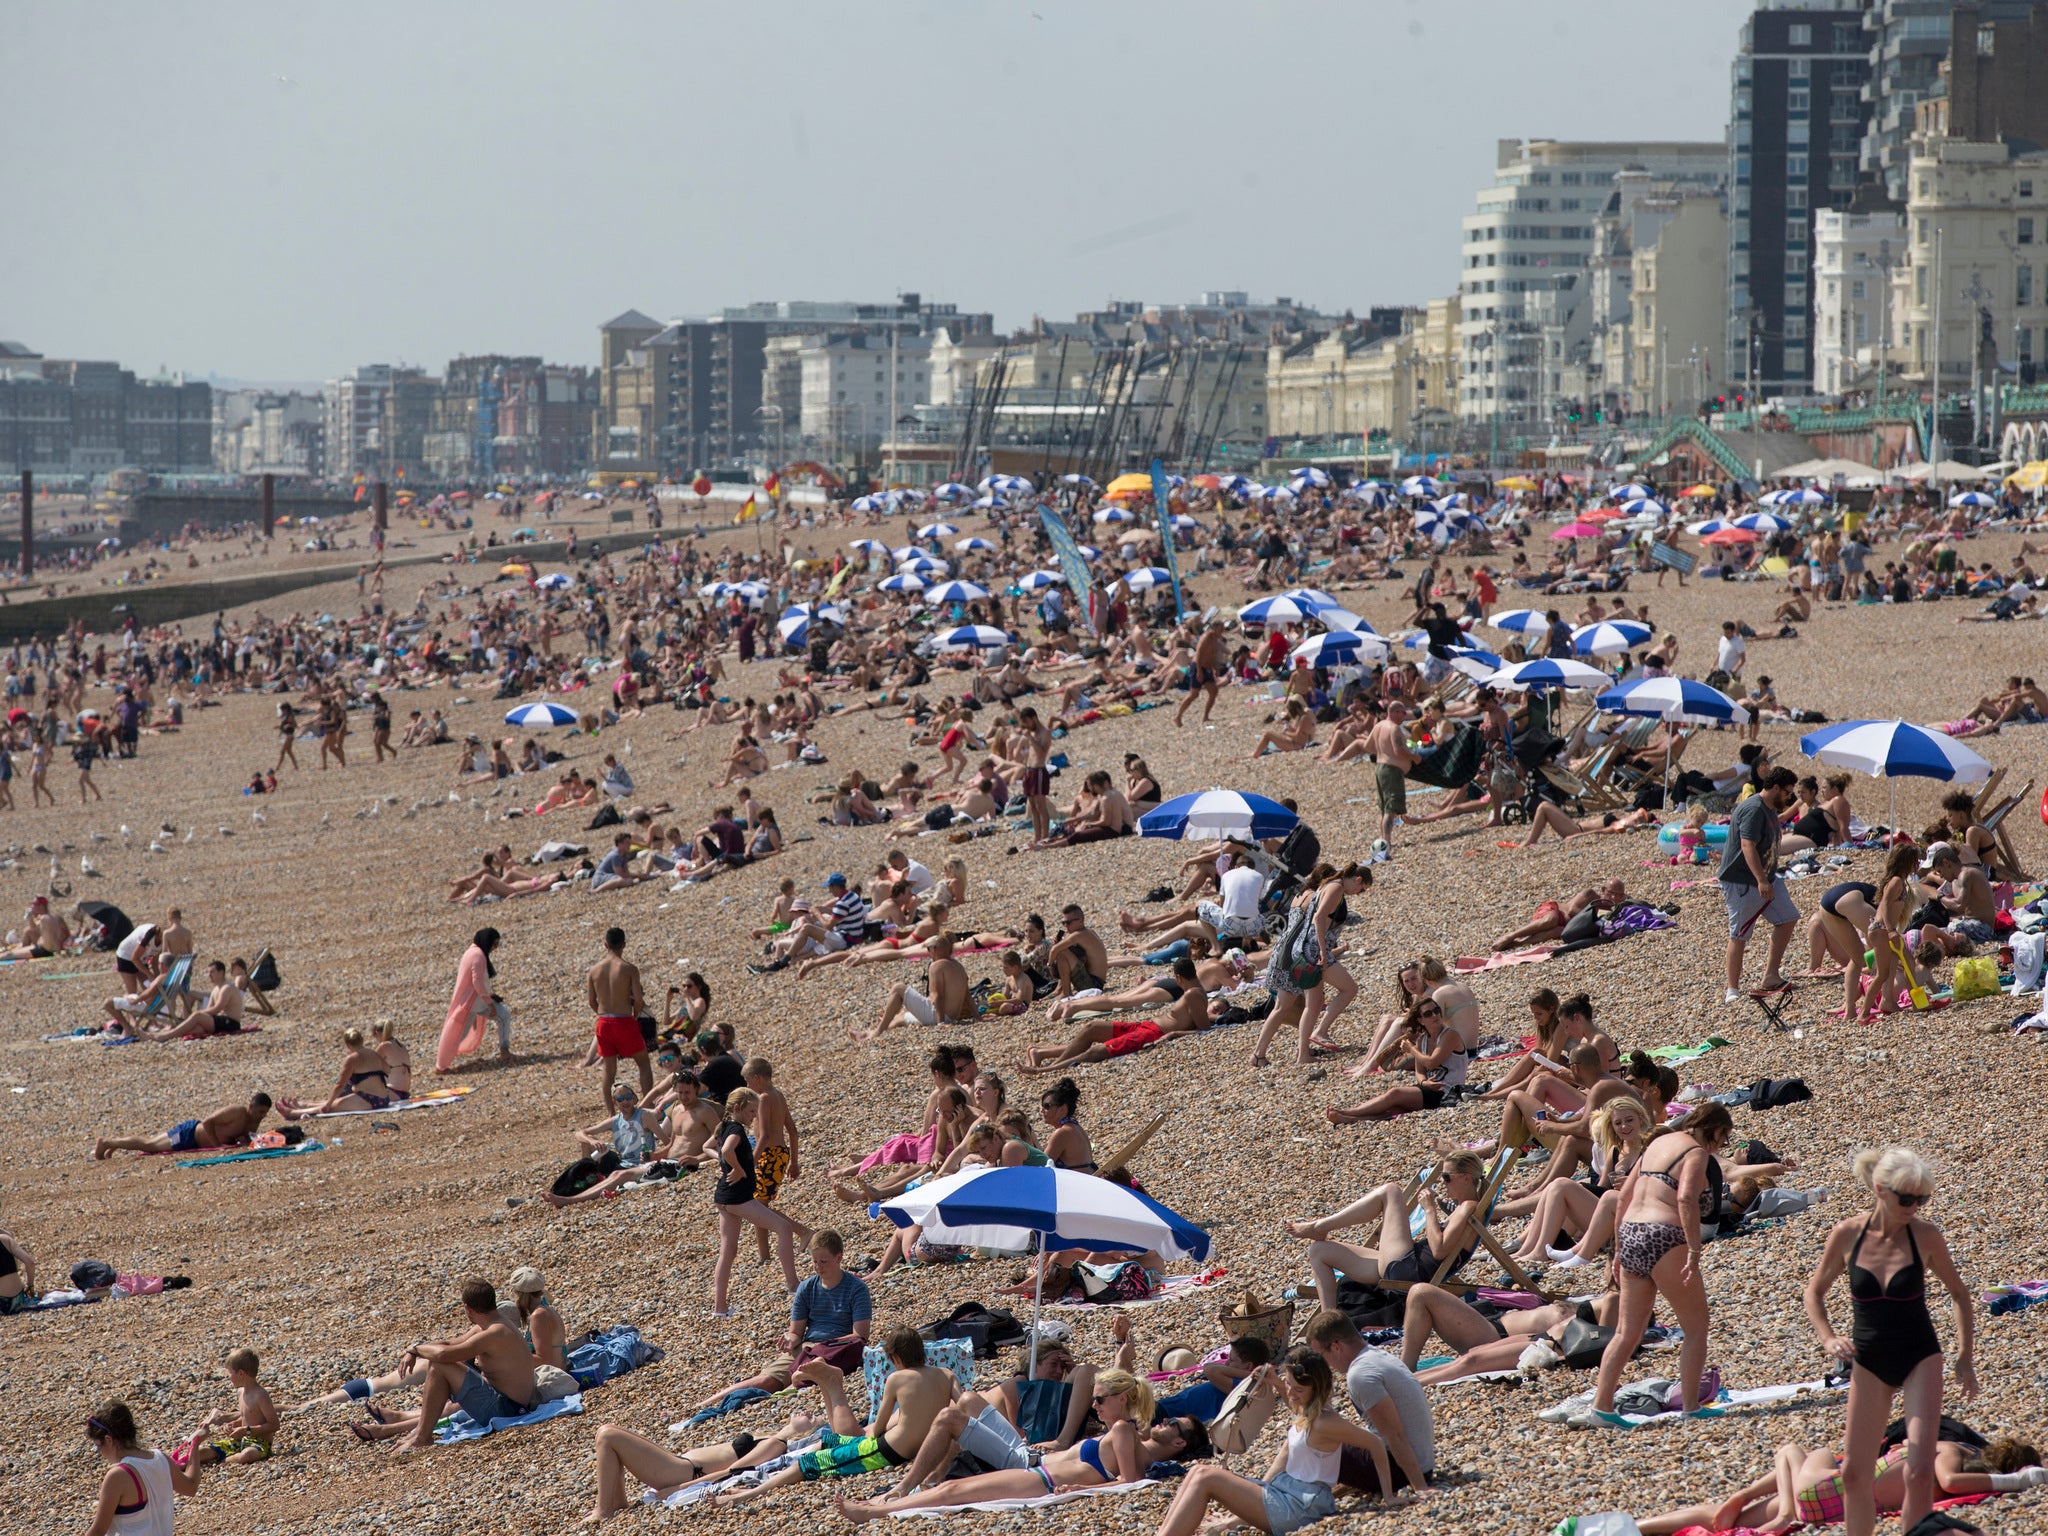 Over 100,000 flocked to Brighton beach today as temperatures soared to 27C